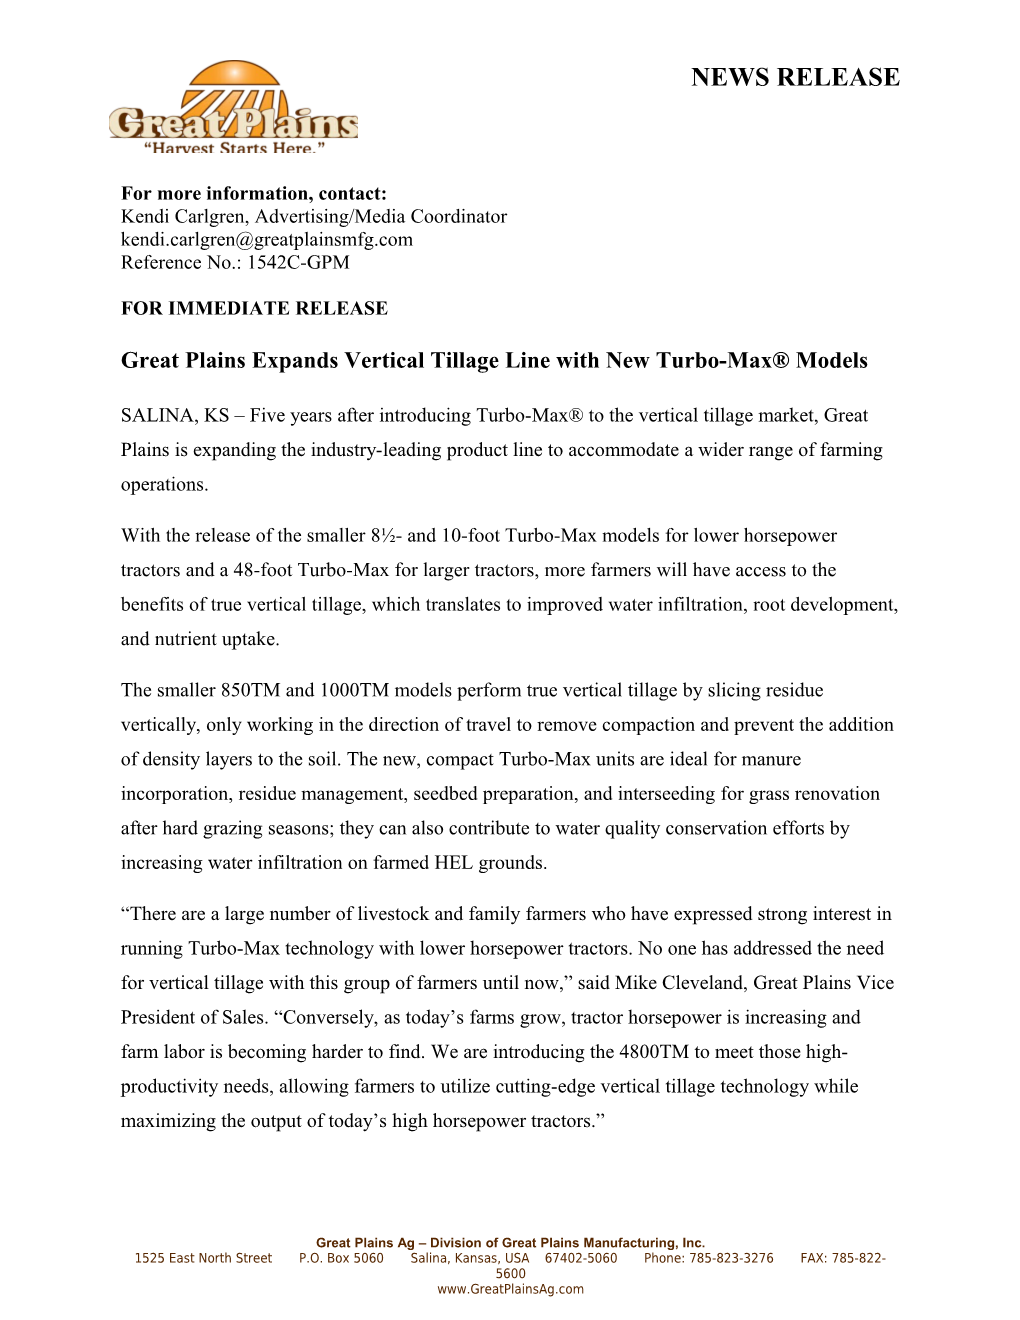 Great Plains Expands Vertical Tillage Line with New Turbo-Max Models